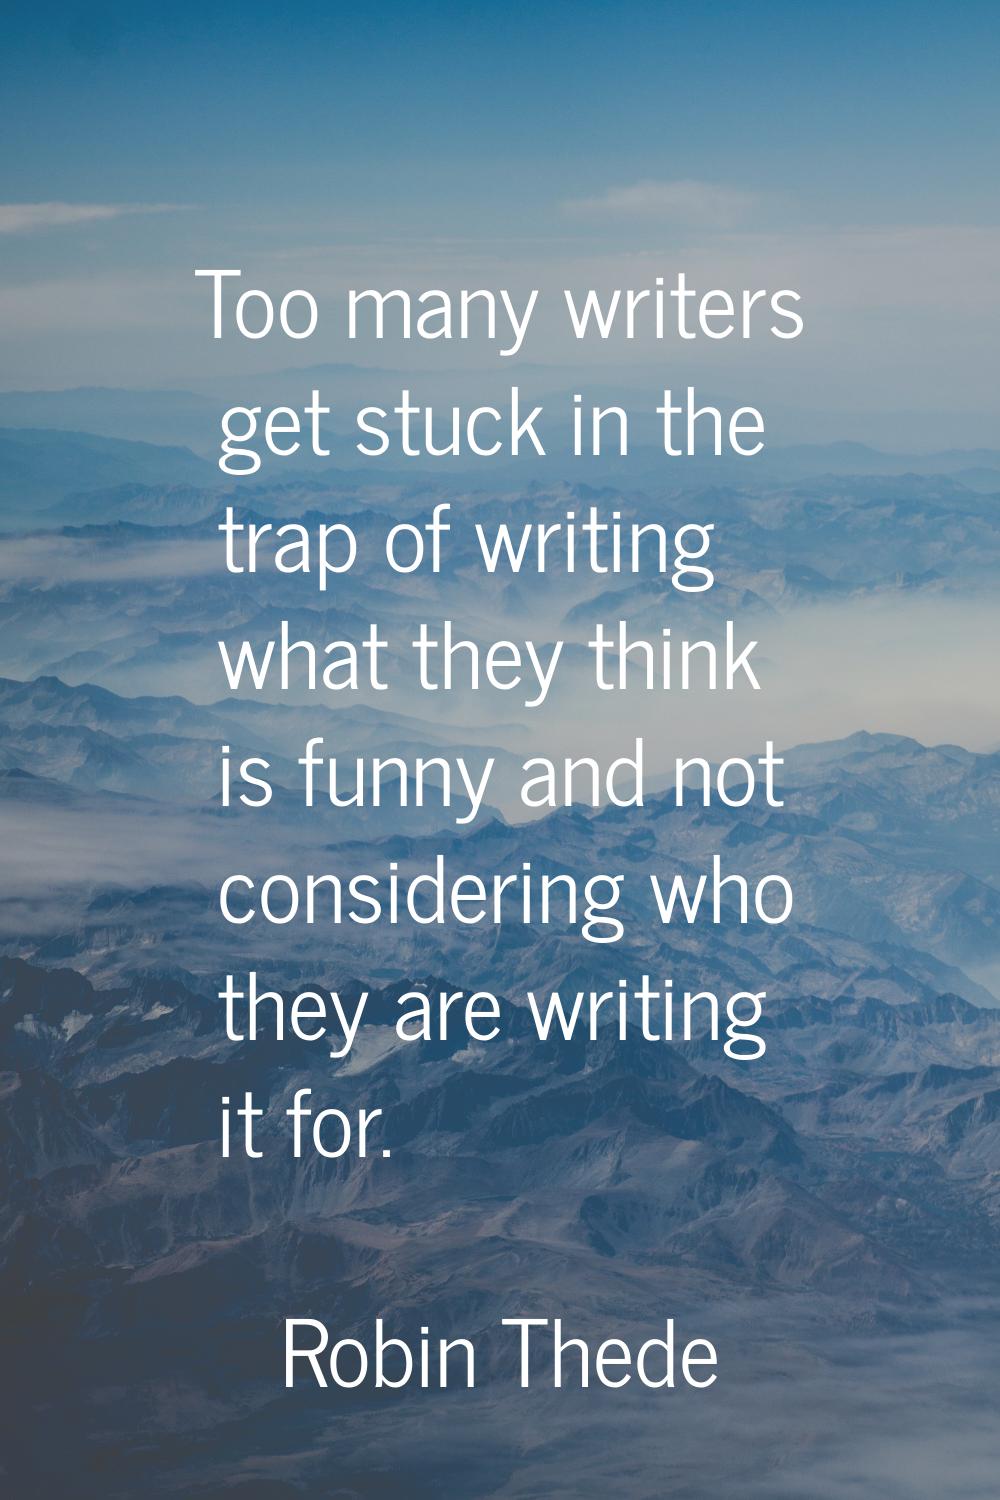 Too many writers get stuck in the trap of writing what they think is funny and not considering who 